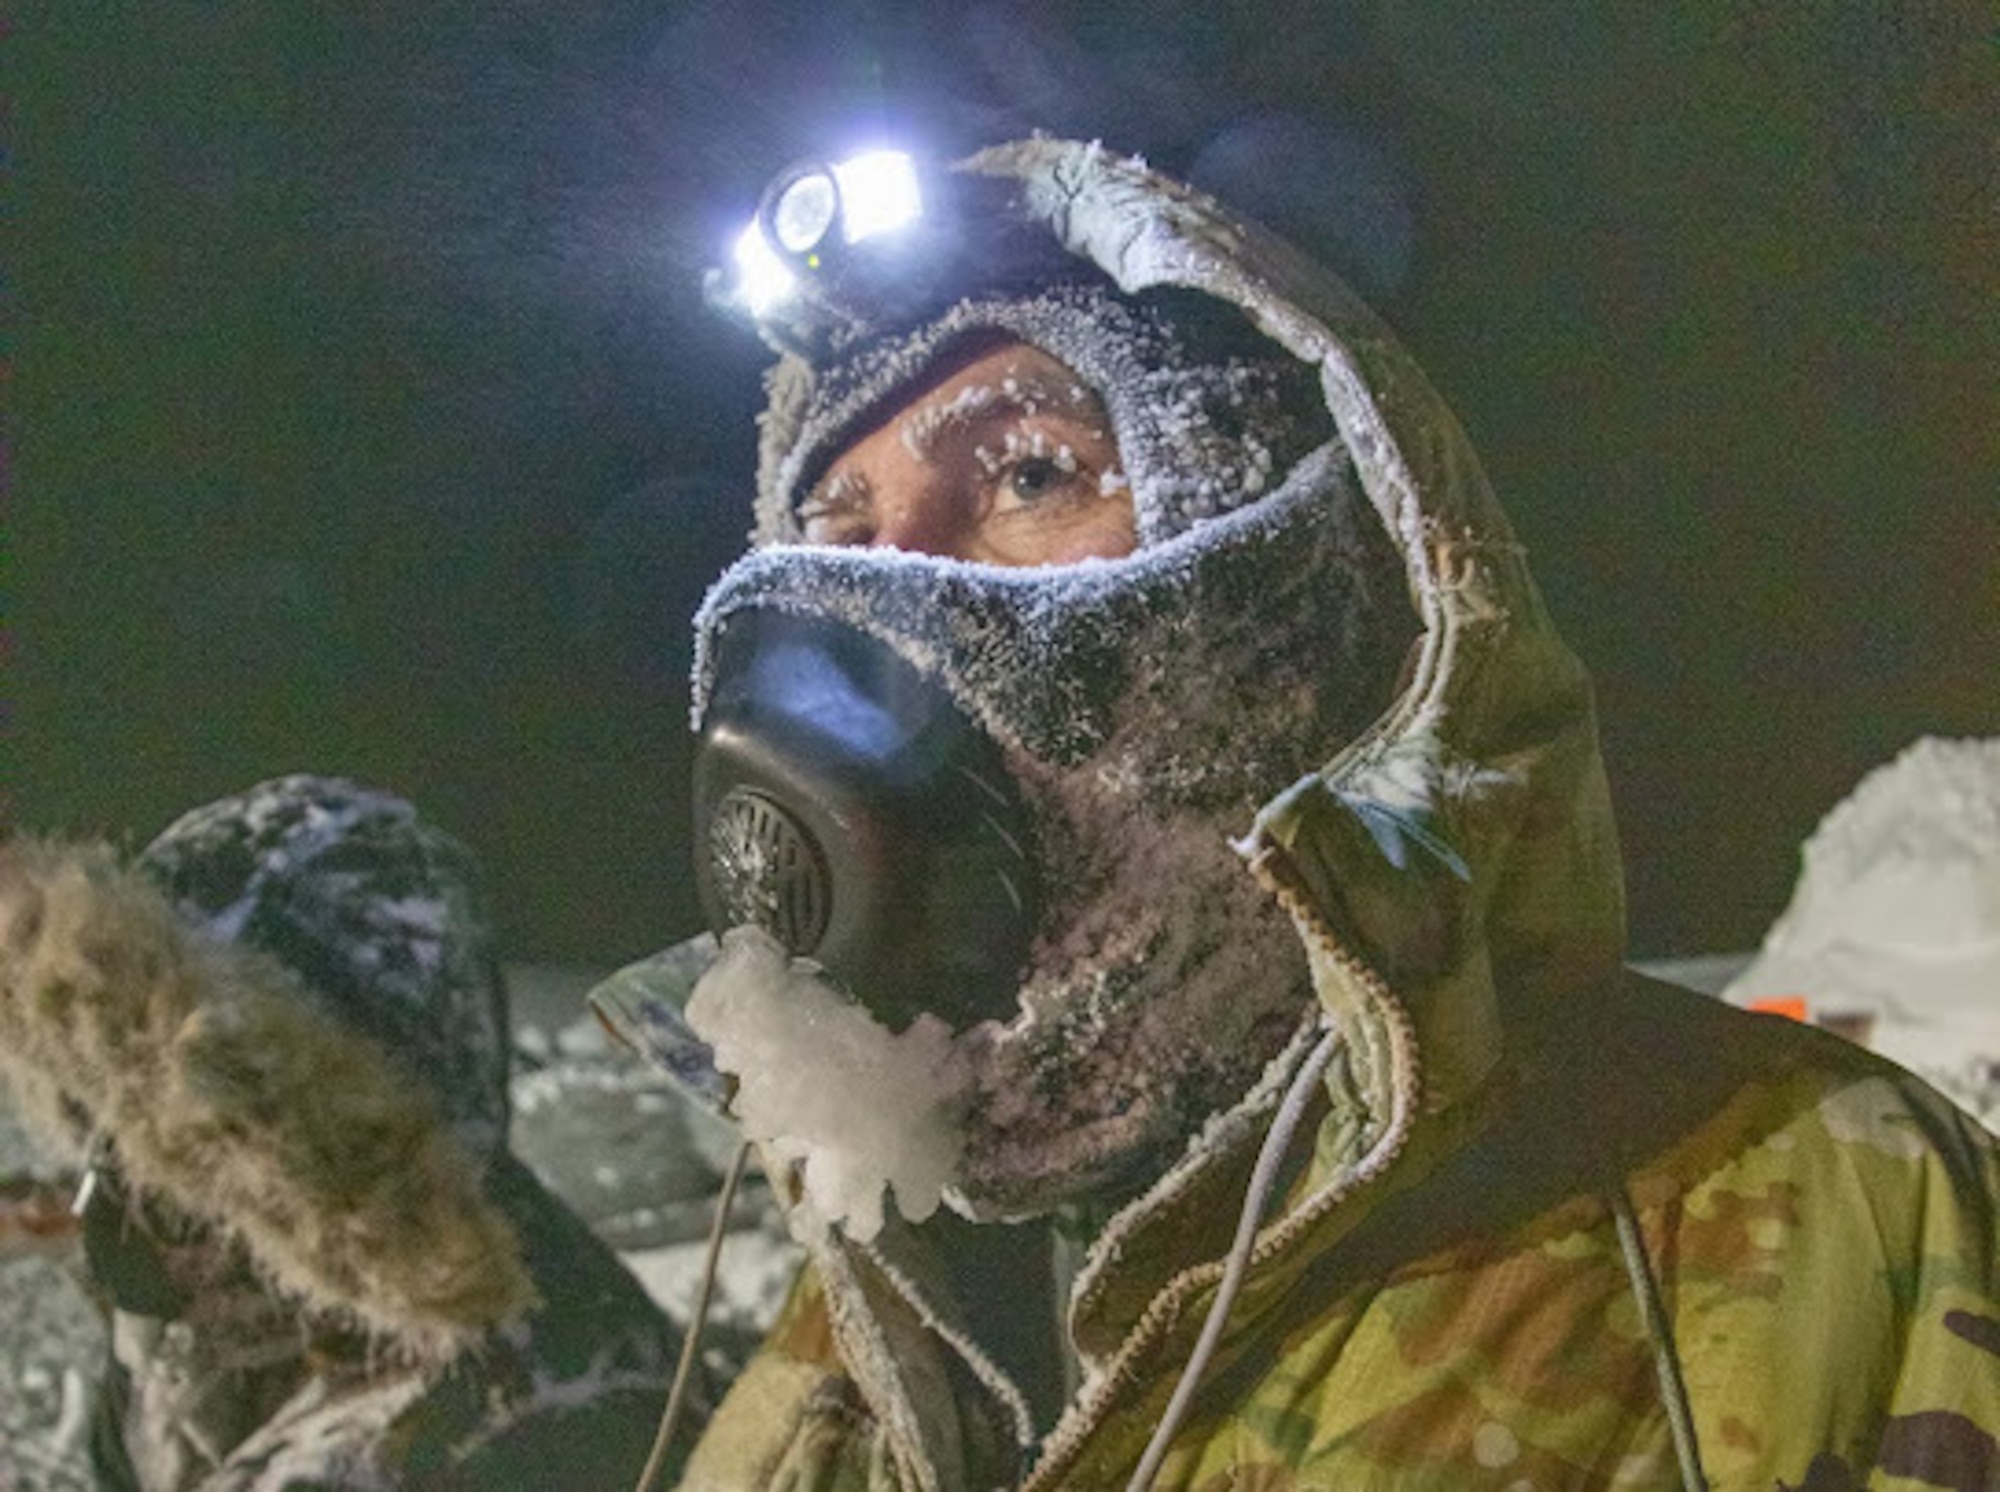 U.S. Air Force Chief Master Sgt. Jeremiah Wickenhauser, 133rd Contingency Response Team, uses a headlamp to work in the early afternoon in Crystal City, Canada.